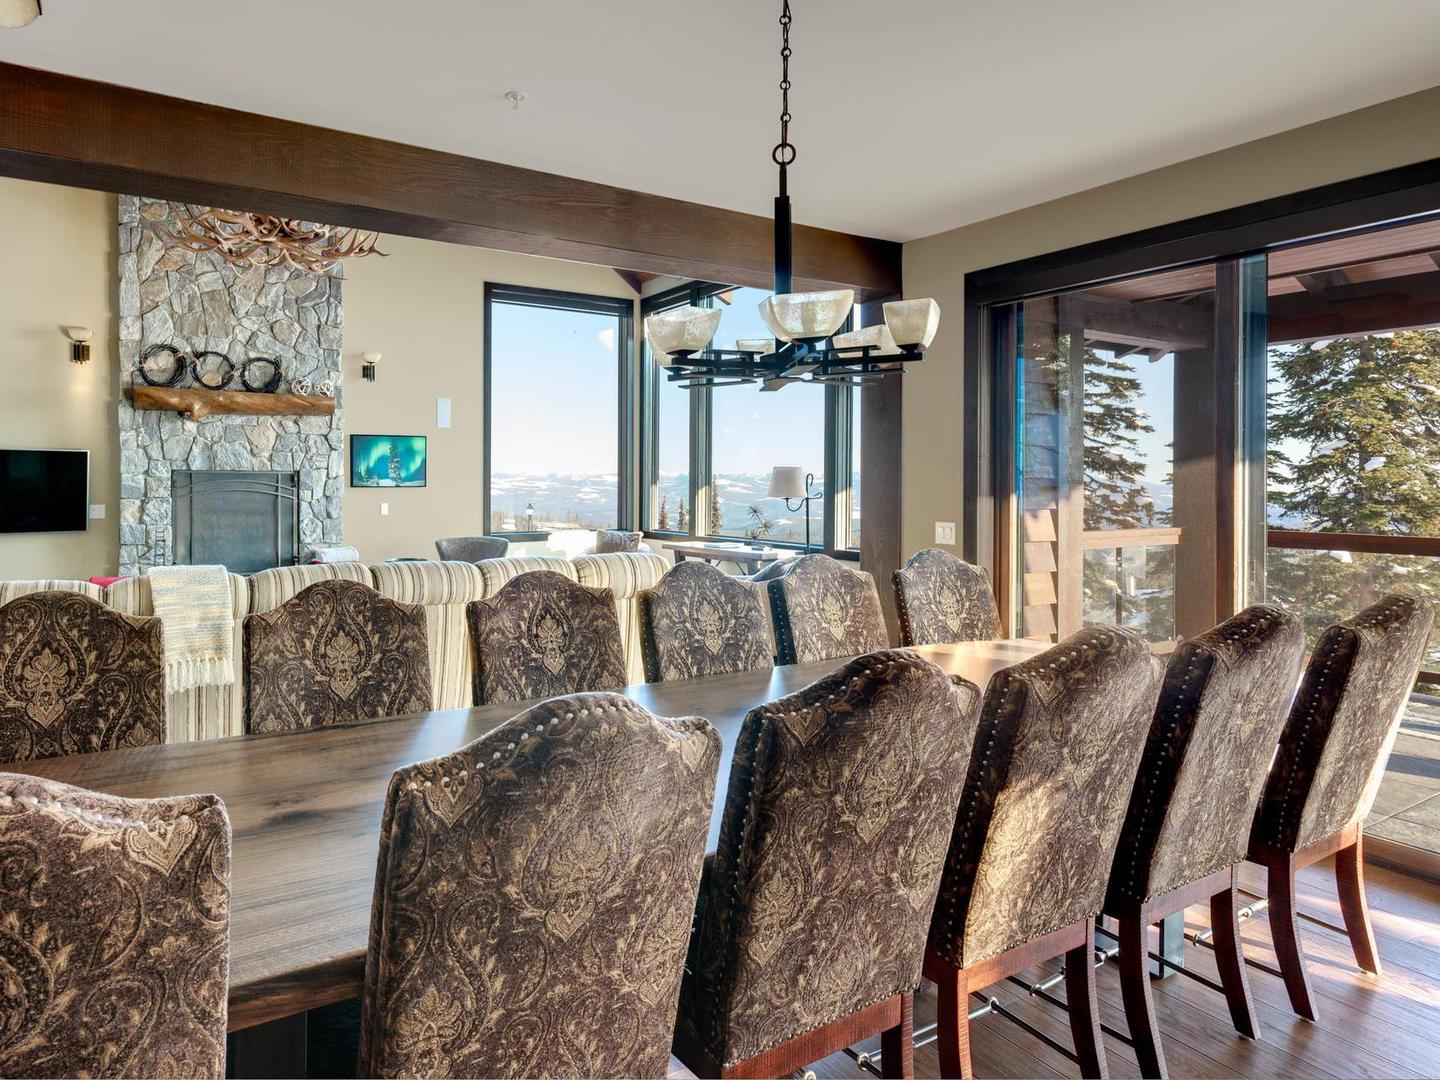 The luxury dining room with a large 12+ dining room table, plenty of natural light from large windows, and luxury furnishings in White Caviar at Big White Ski Resort.